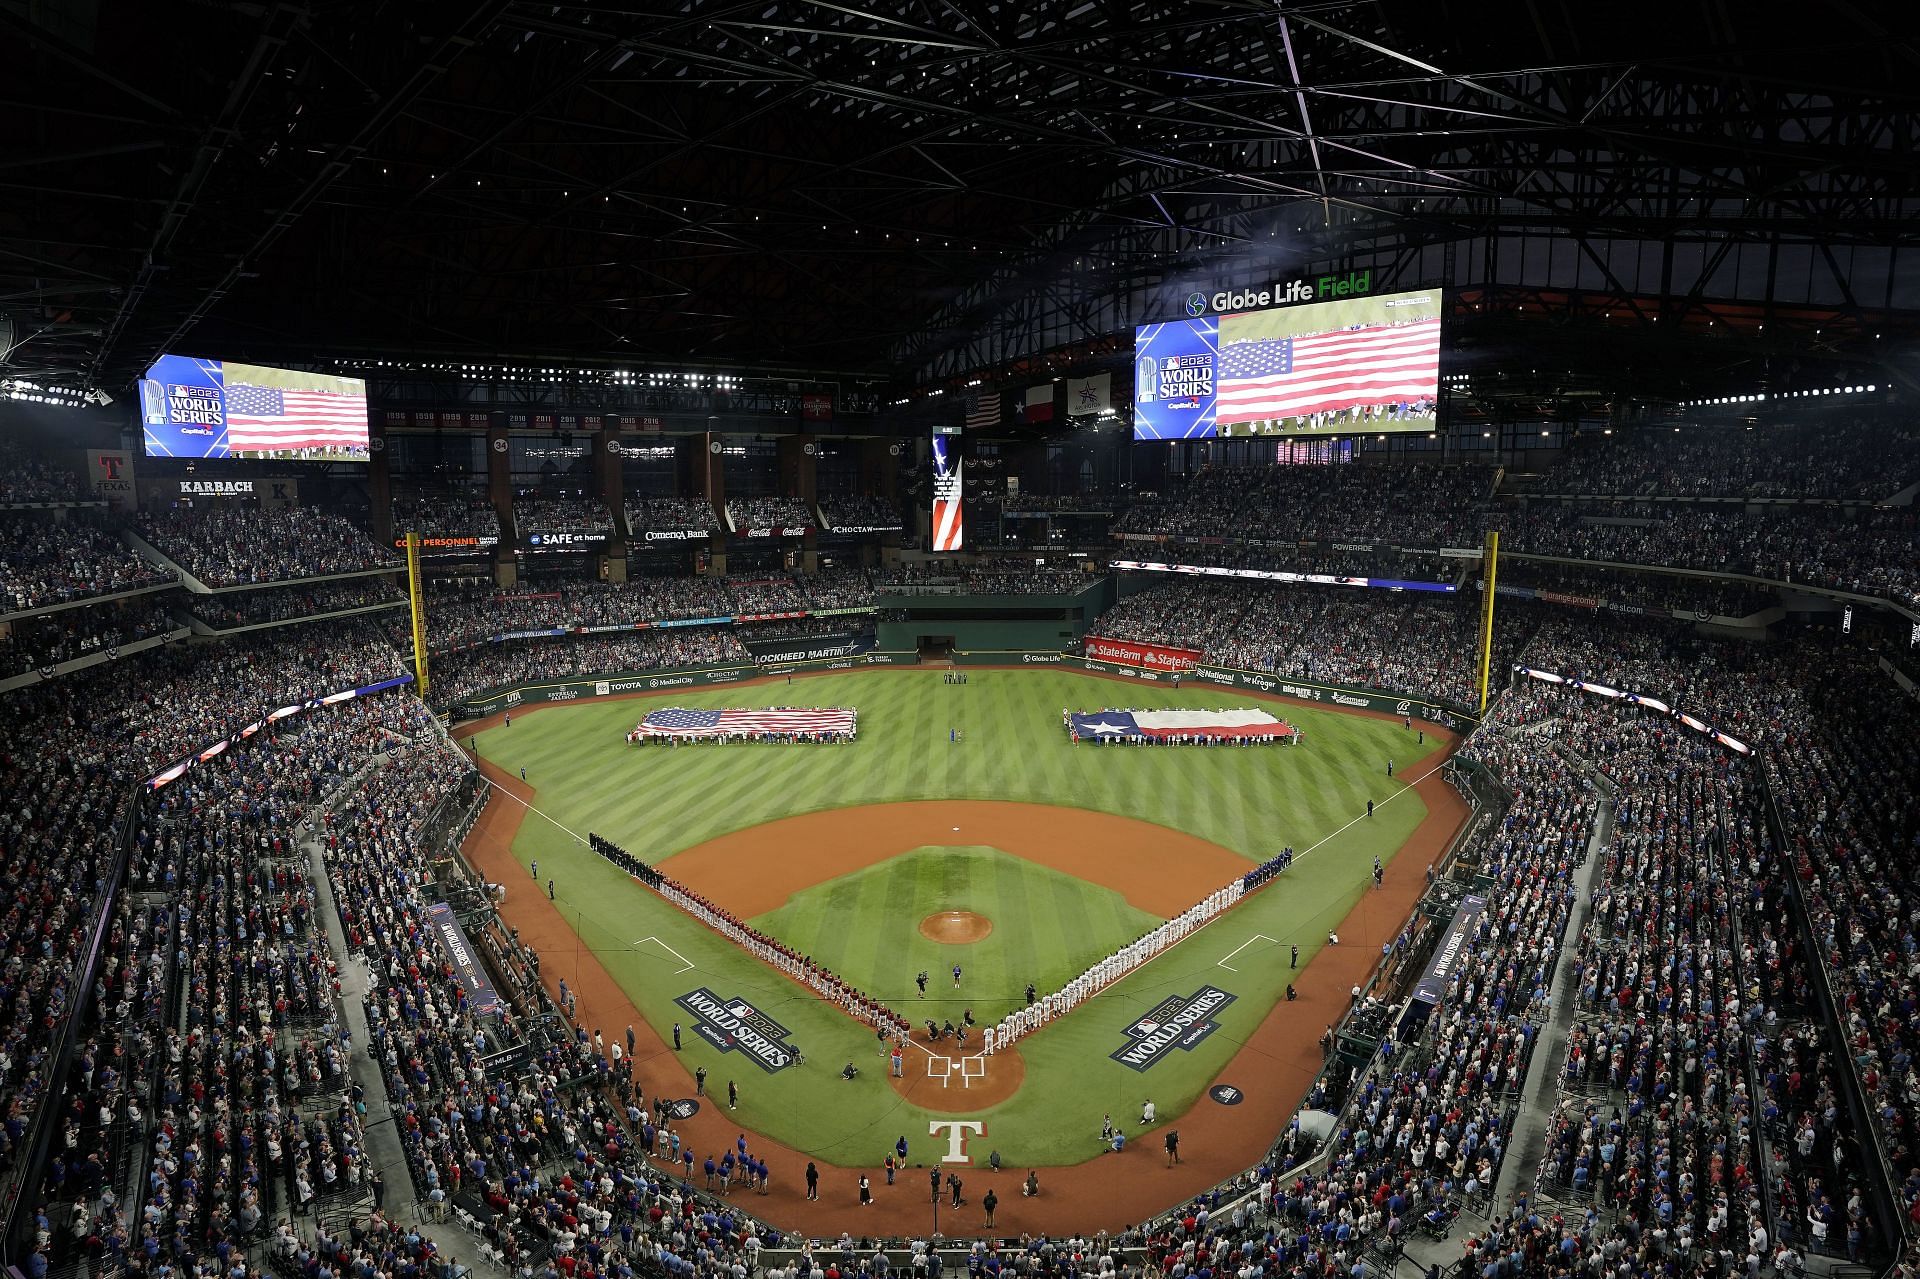 The Rangers could host the 2026 World Baseball Classic